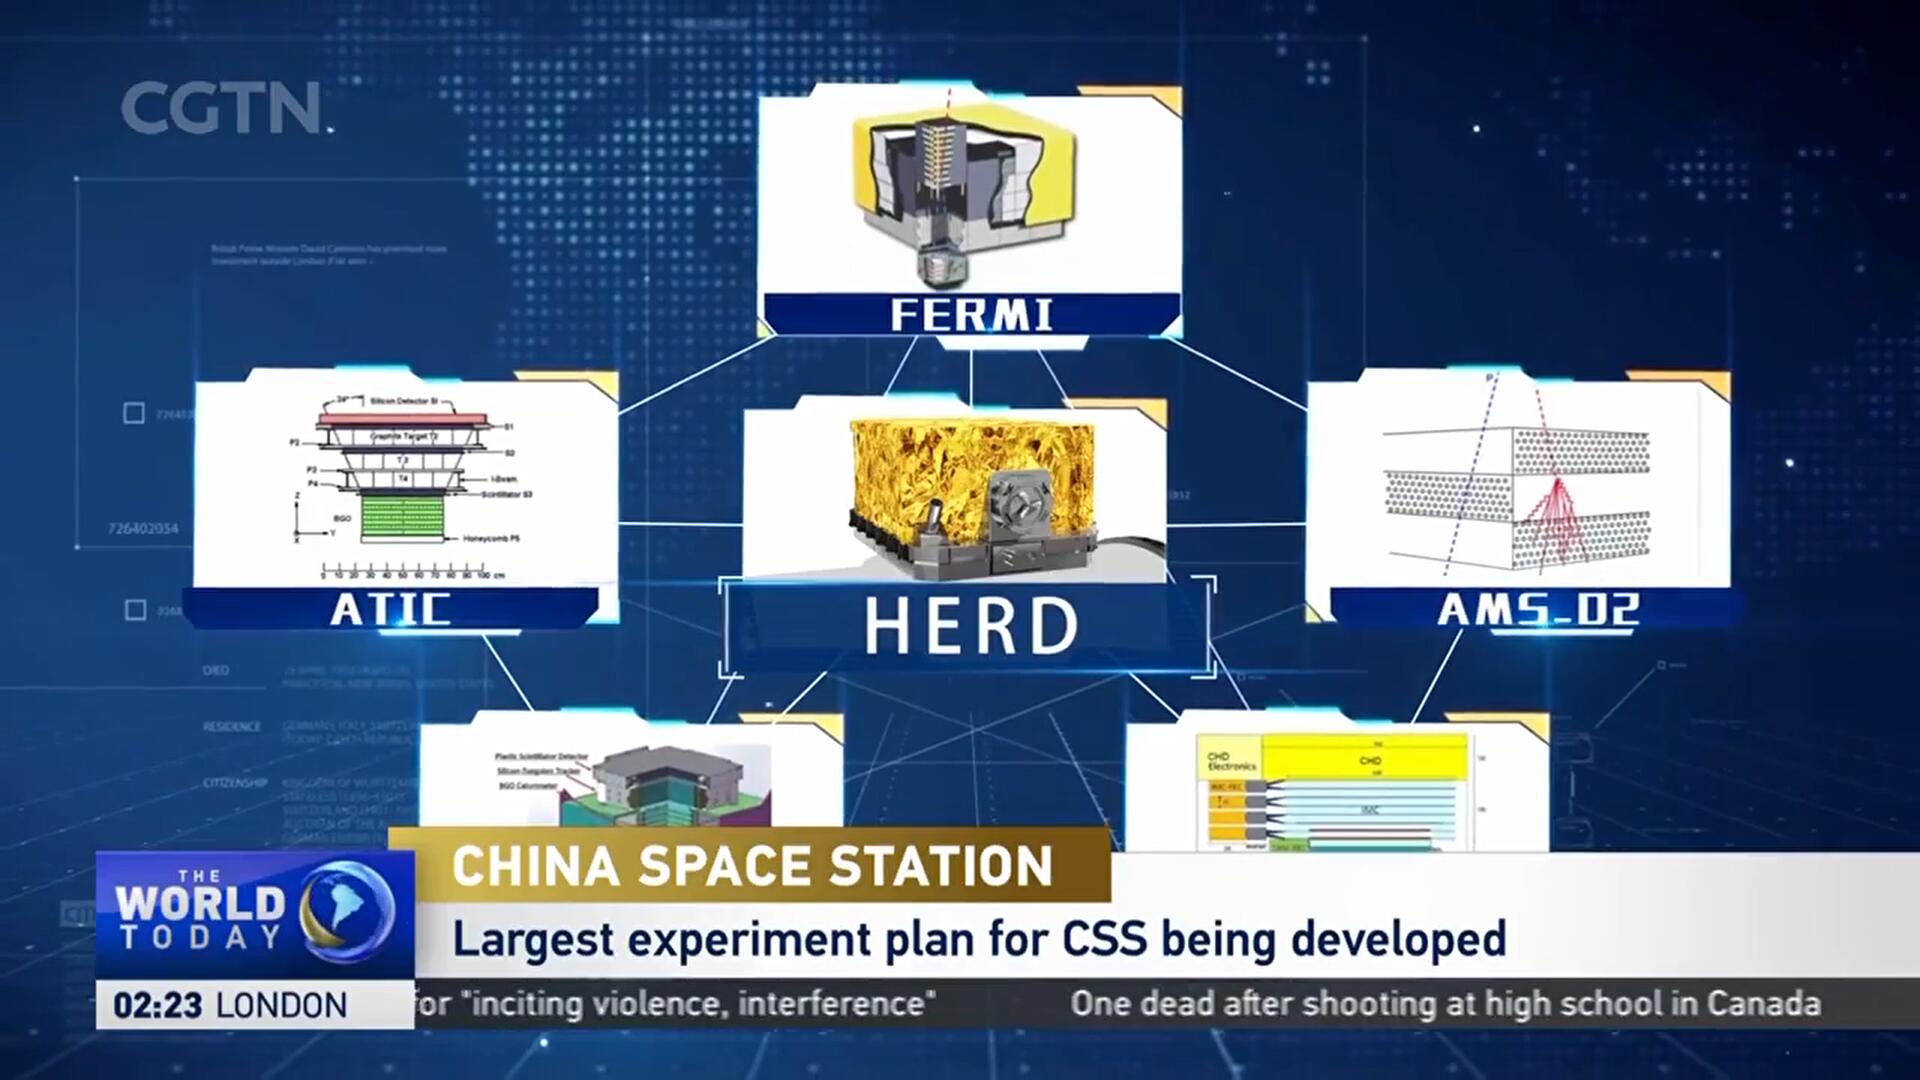 China Space Station: Largest Experiment Plan for CSS Being Developed